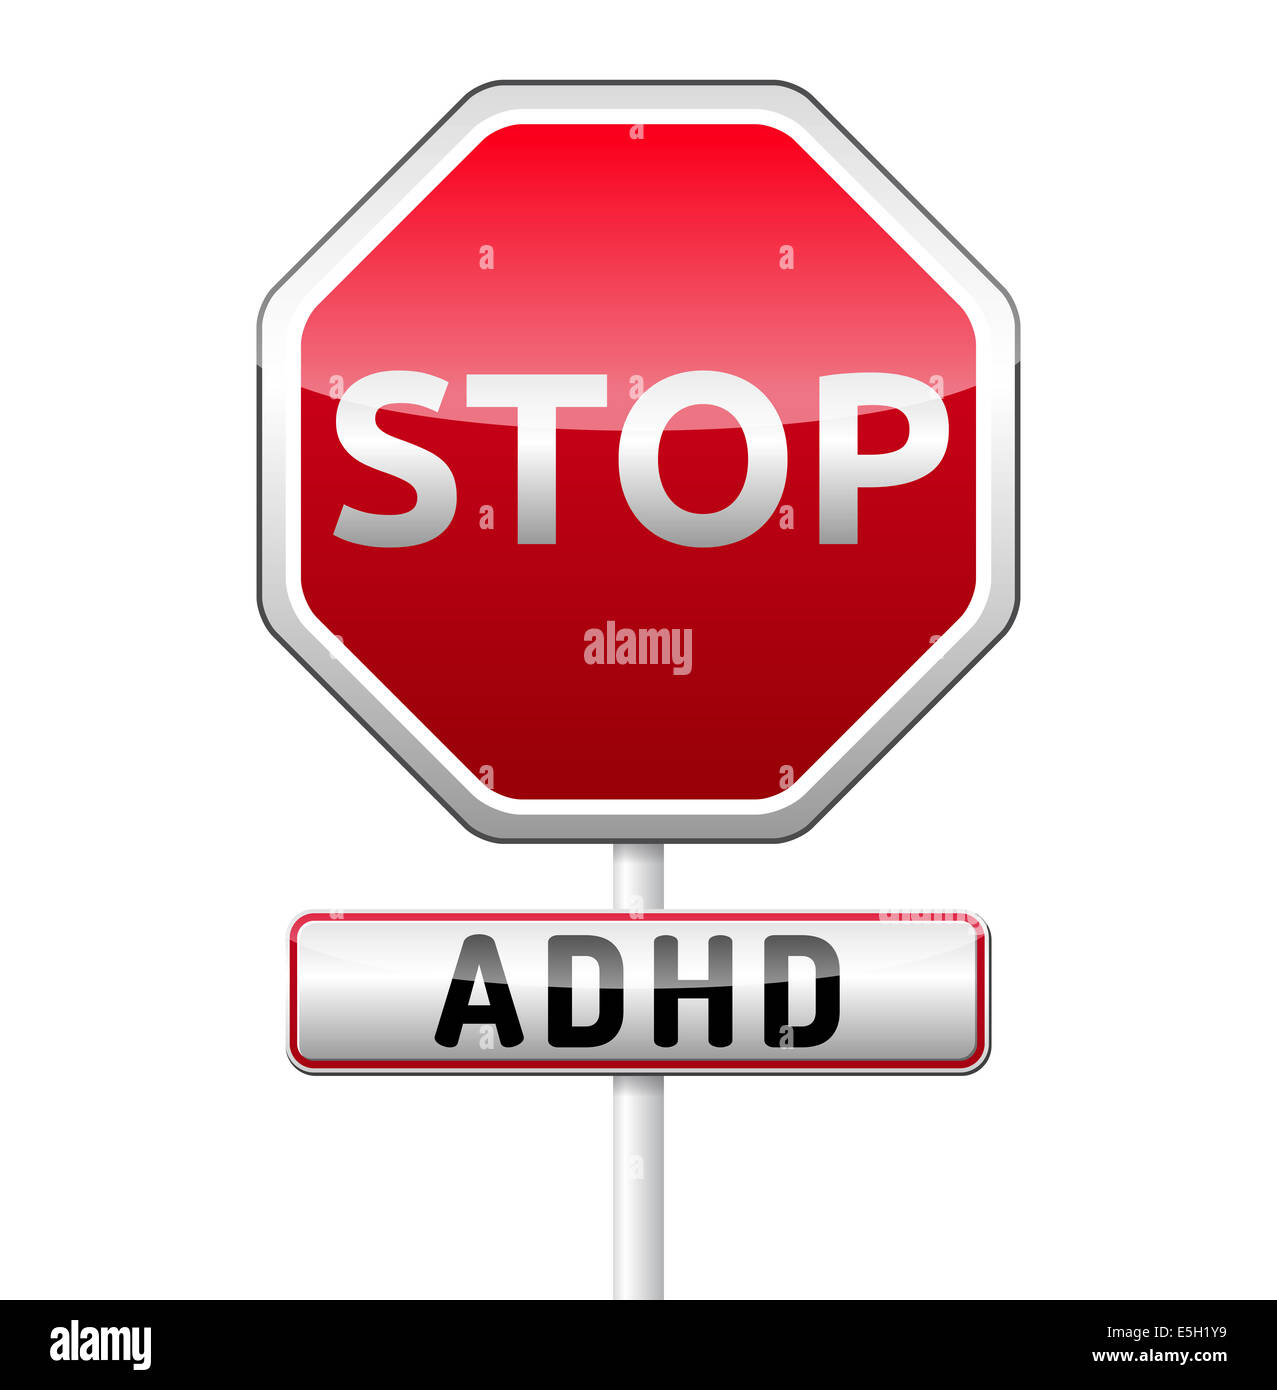 ADHD - Attention deficit hyperactivity disorder - isolated sign with reflection and shadow on white background Stock Photo